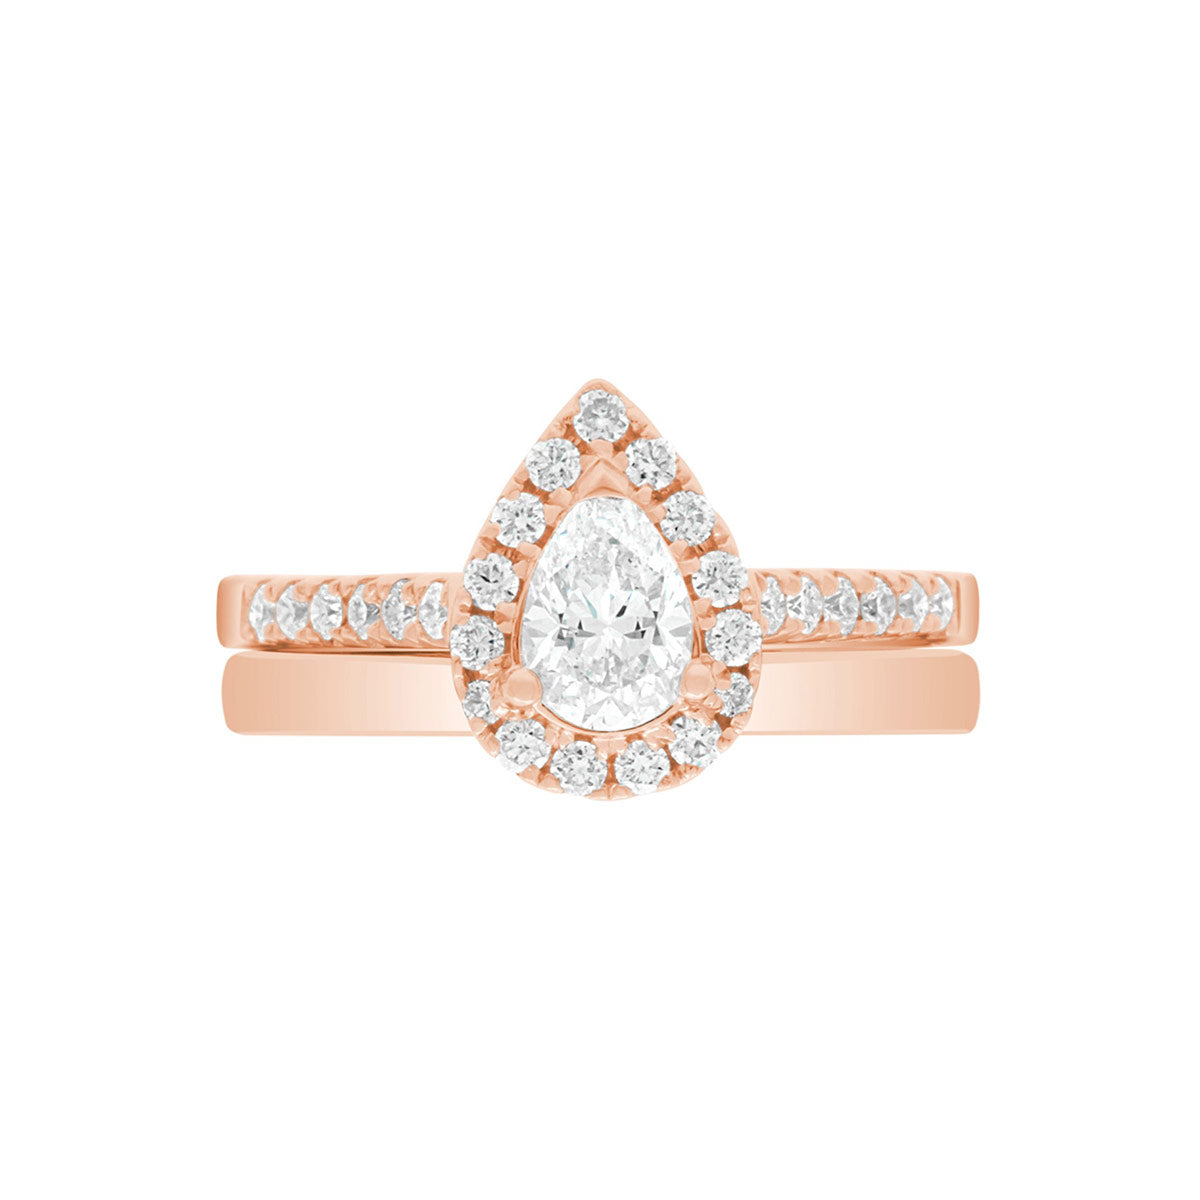 Pear Cut Halo Ring in rose gold, laying flat with a matching rose gold wedding band,on A WHITE SURFACE WITH A WHITE BACKGROUND